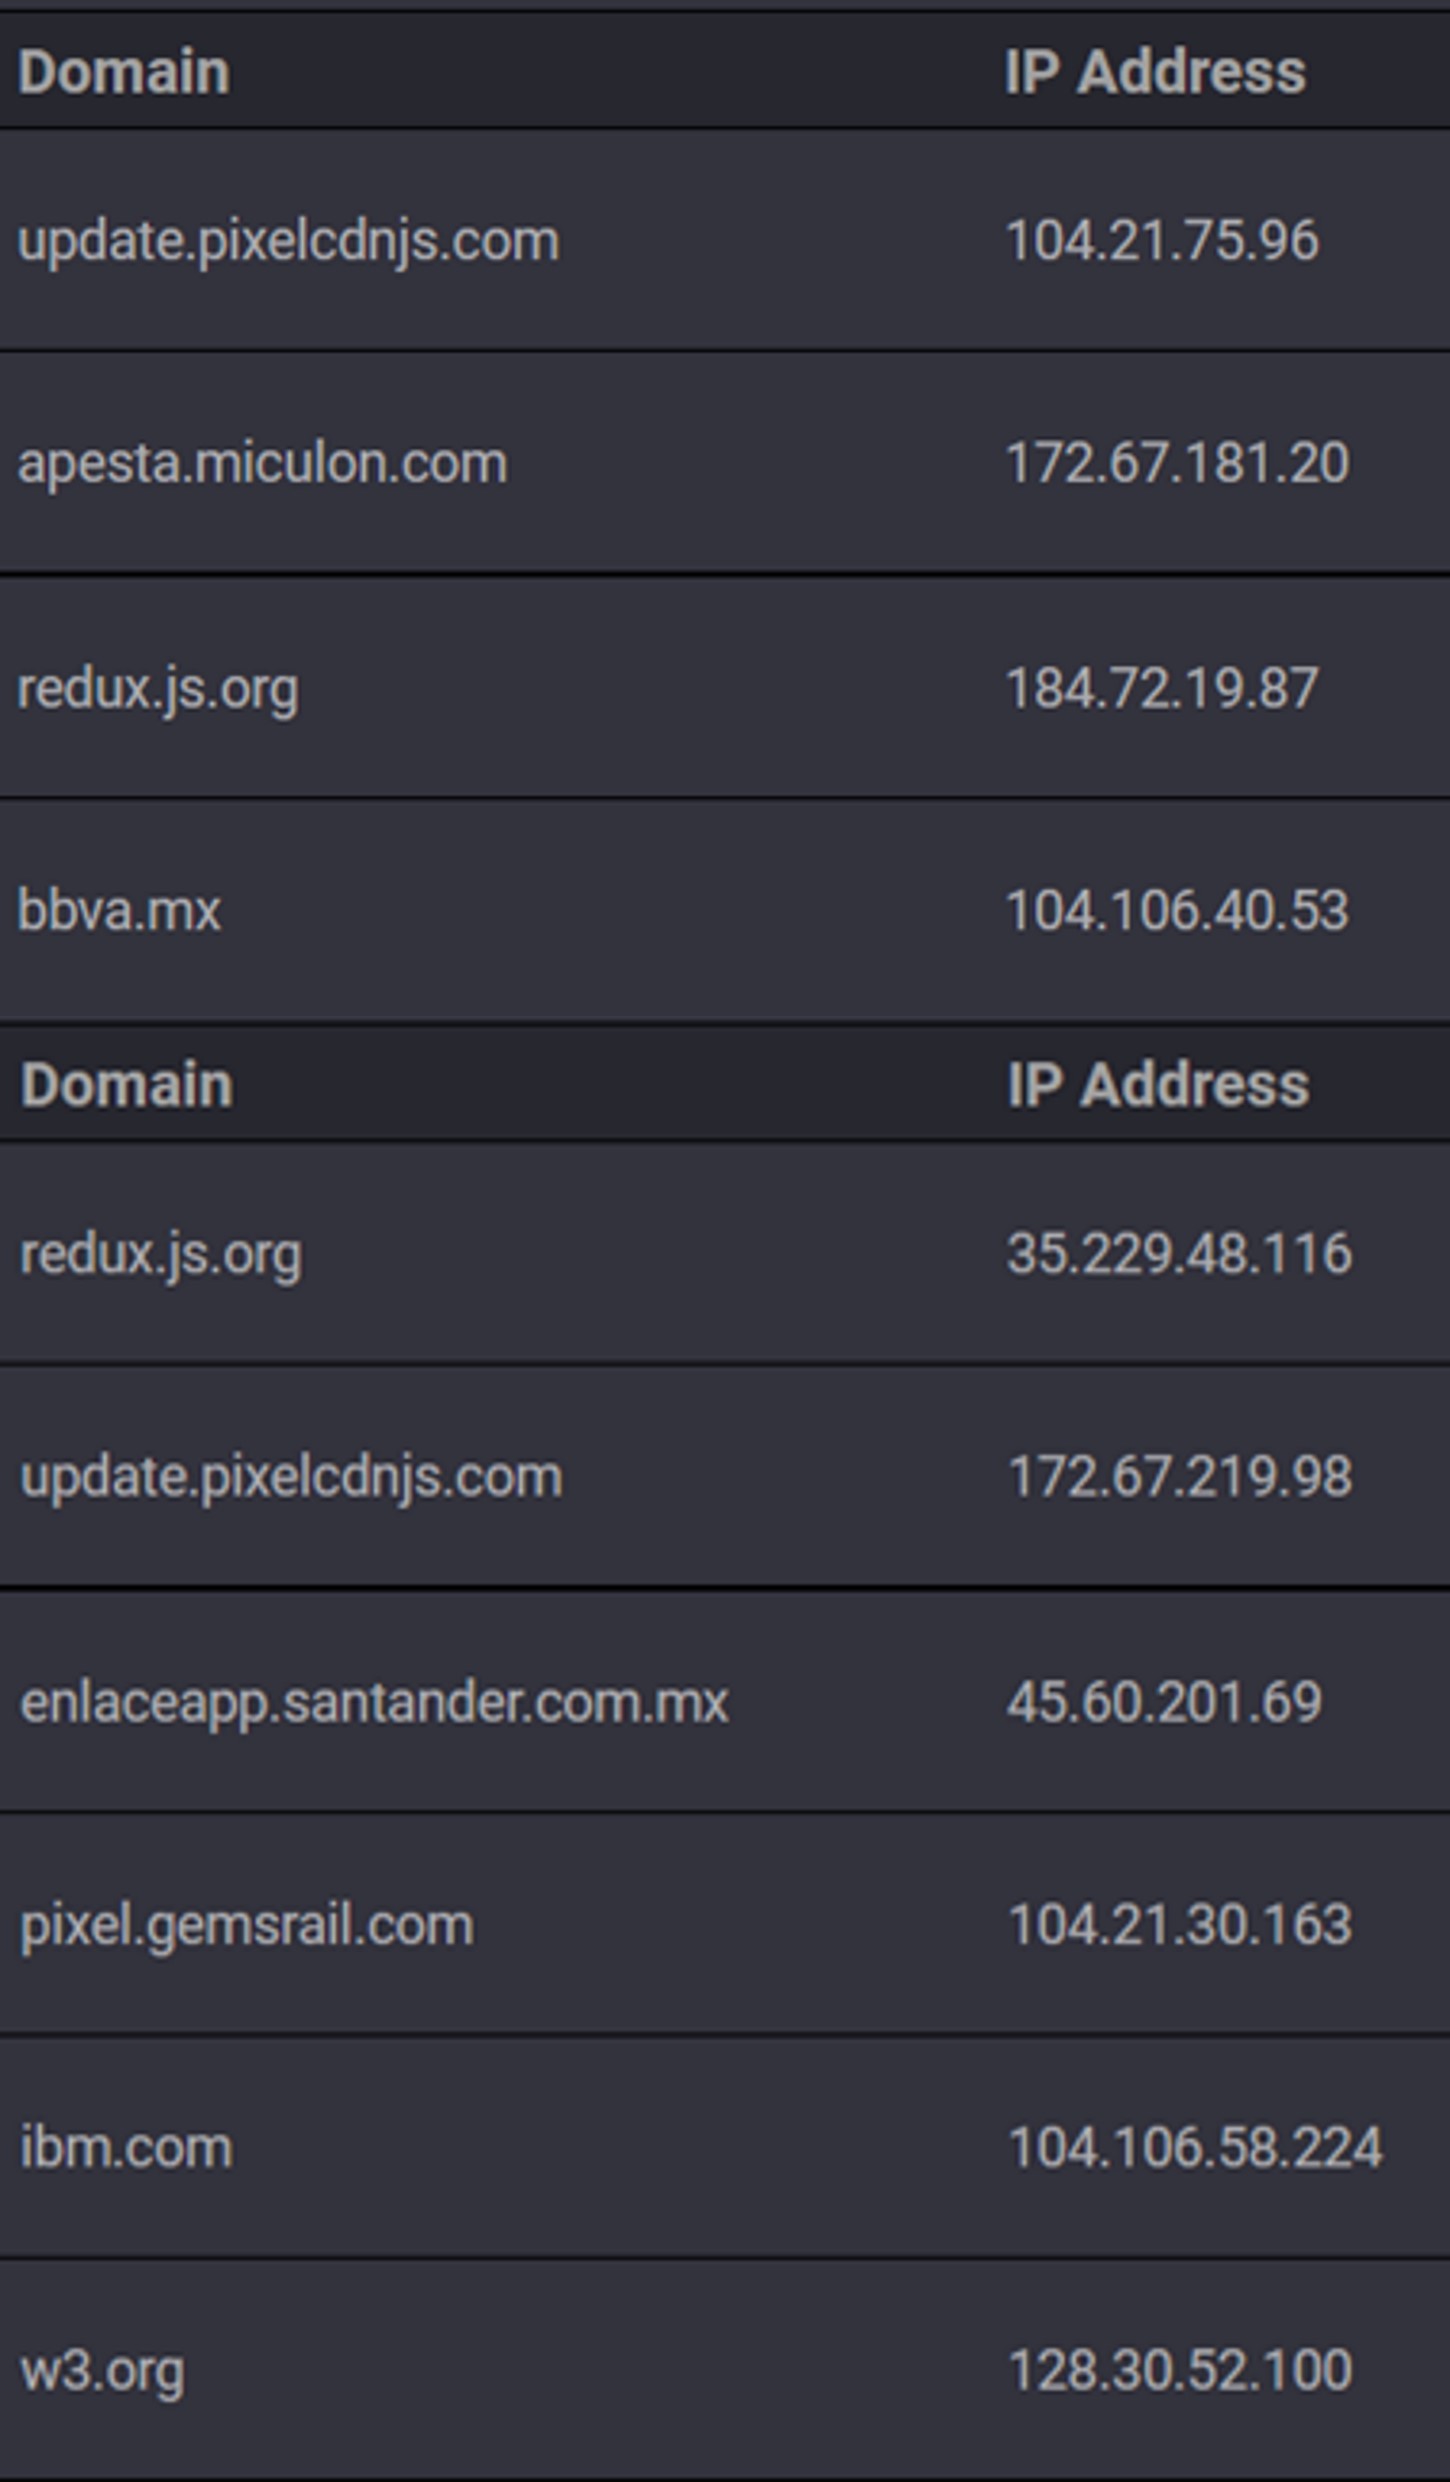 Domains found in the JS files of the malicious extensions